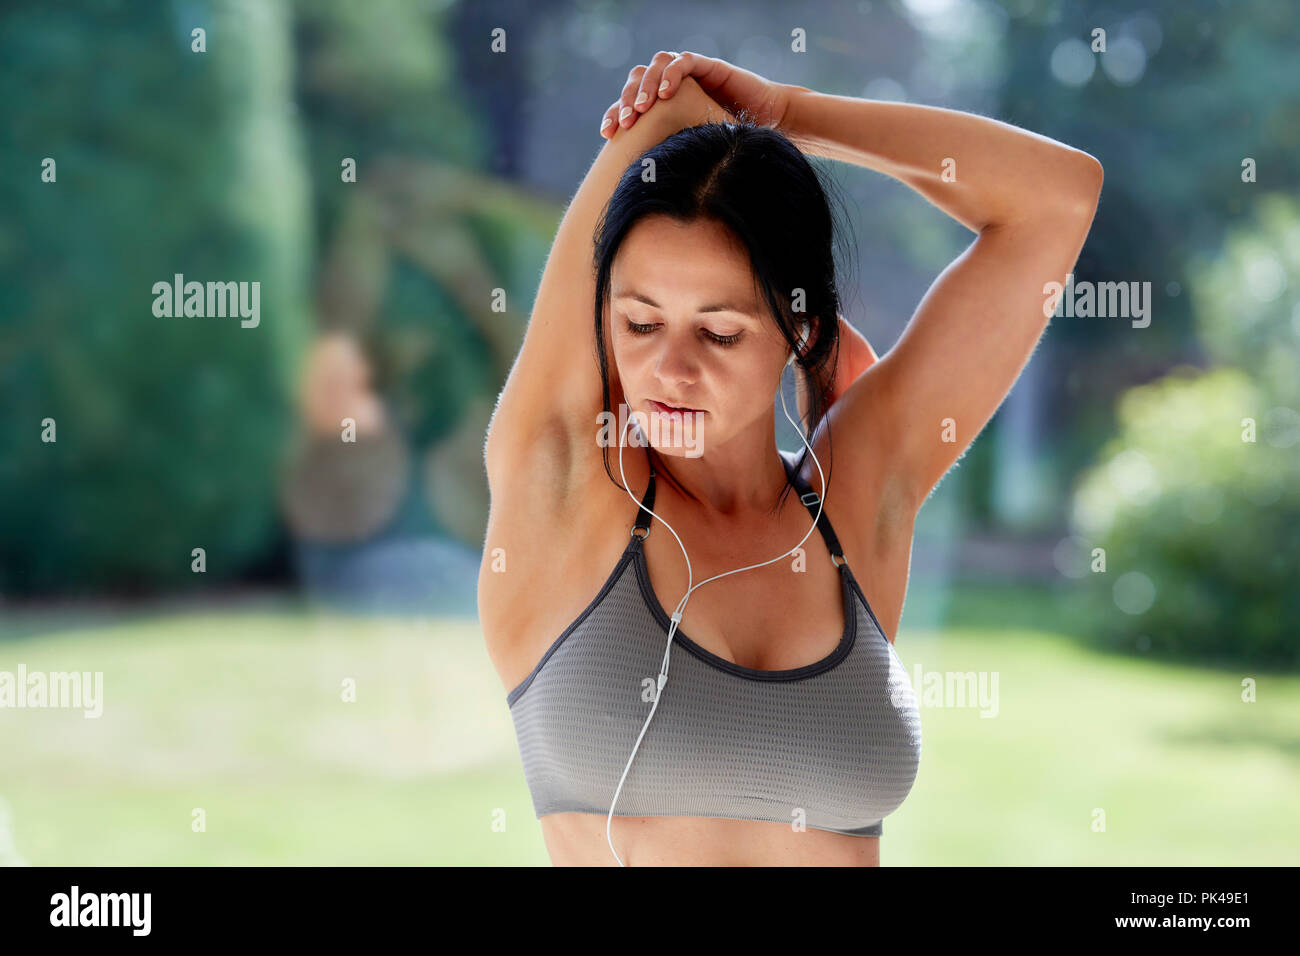 Girl cooling down after exercising Stock Photo